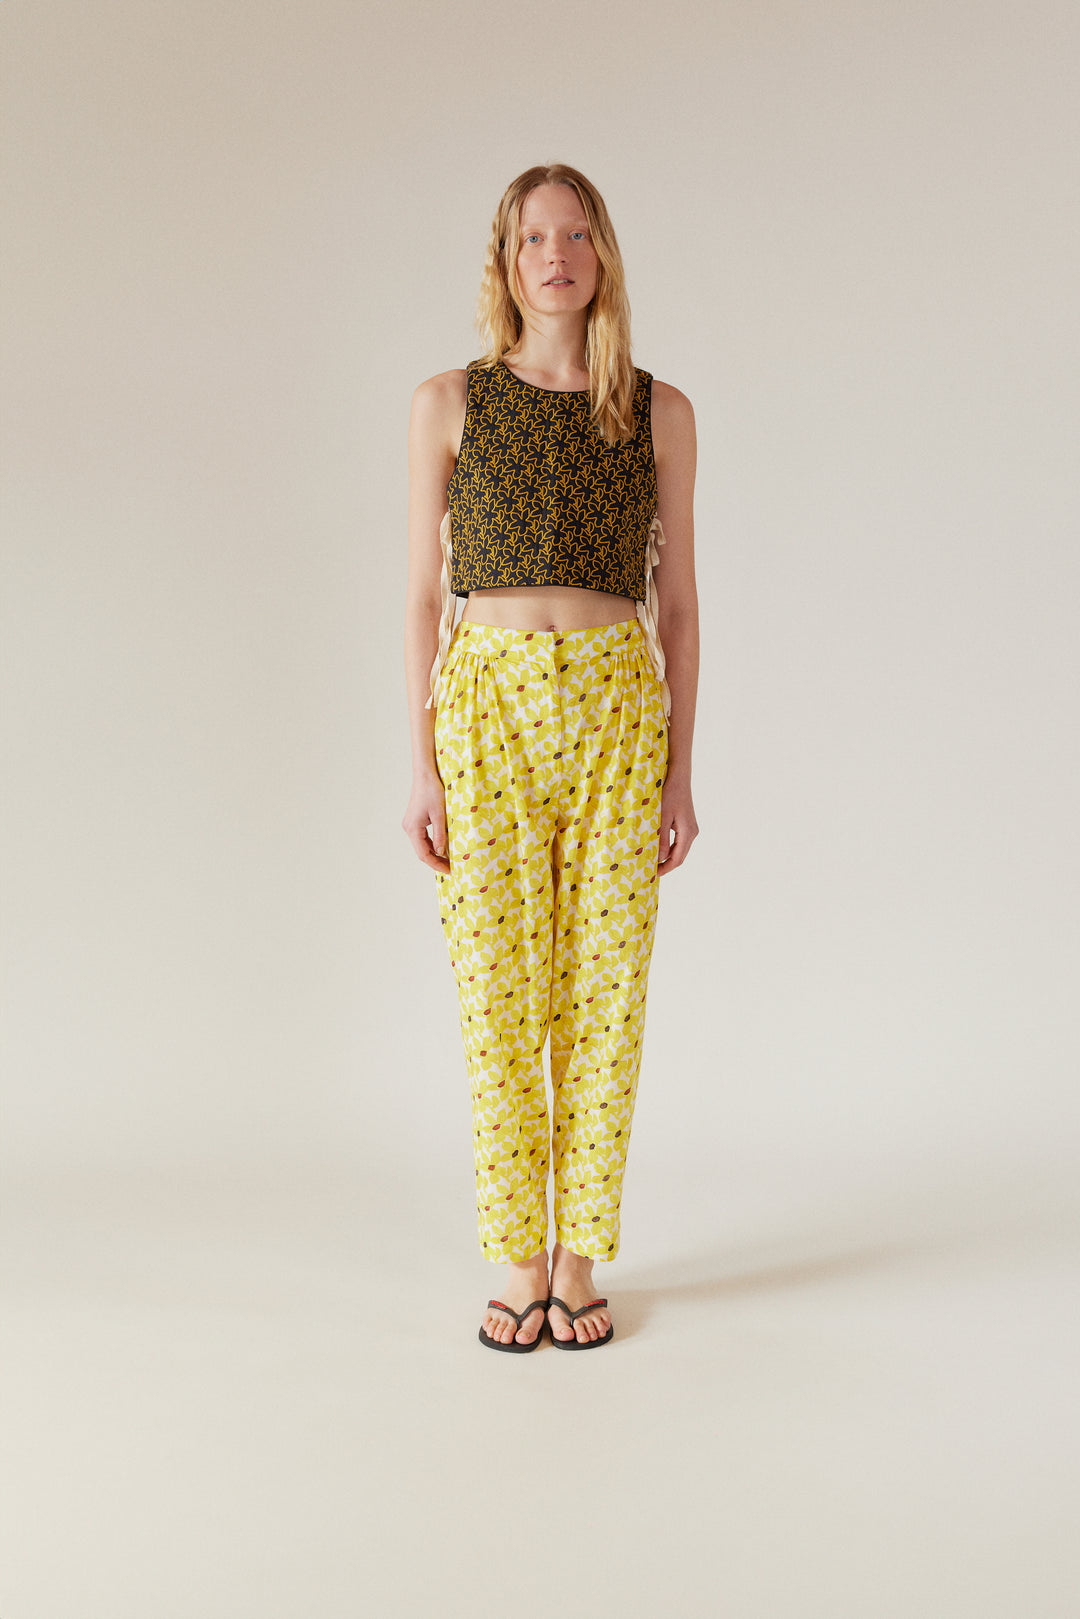 YAZ - Daisy Printed Ankle Length Pants With Side Pockets